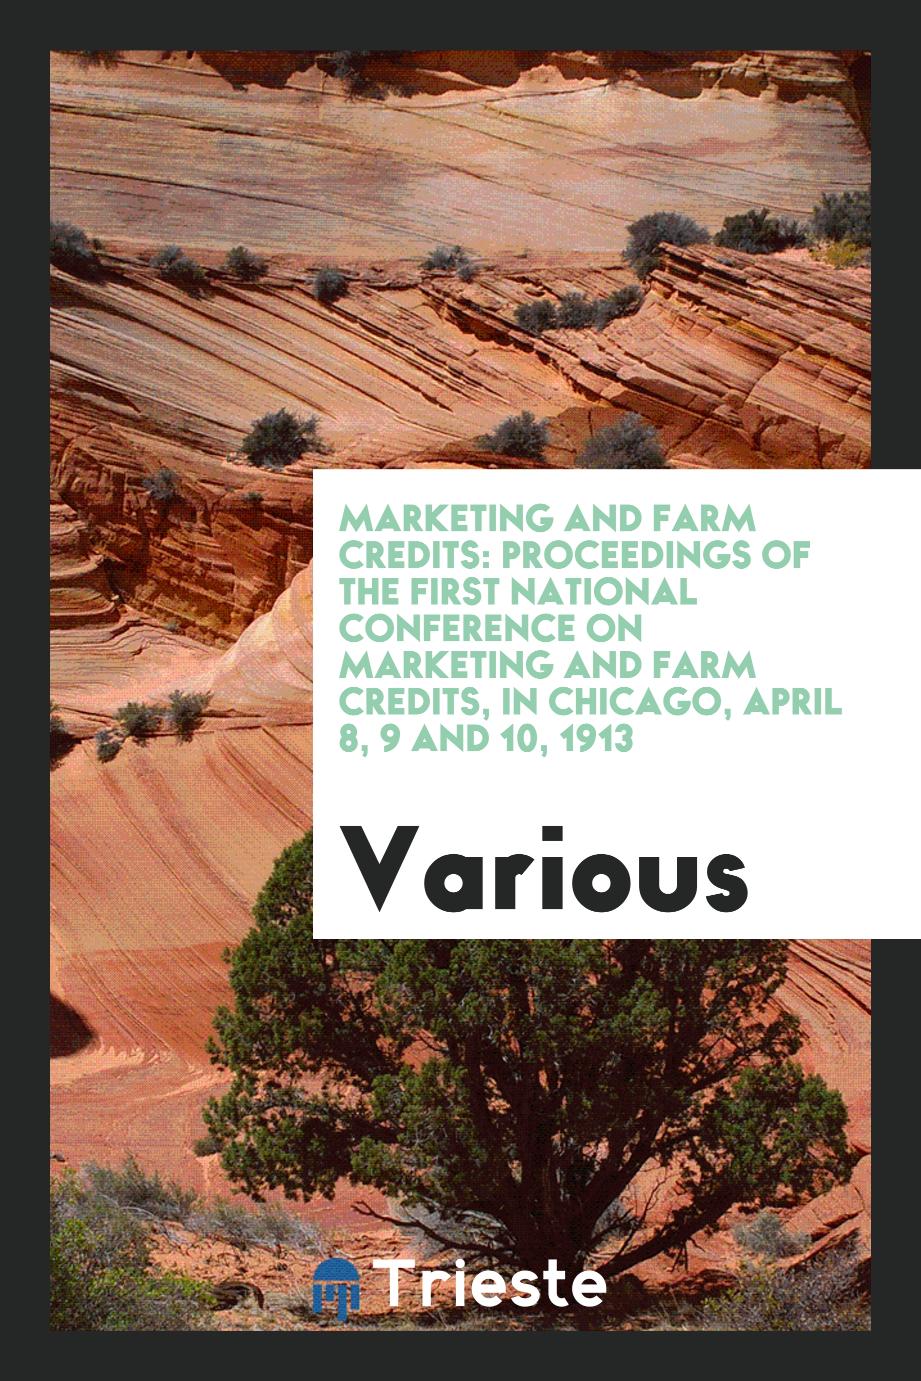 Marketing and farm credits: proceedings of the first National Conference on Marketing and Farm Credits, in Chicago, April 8, 9 and 10, 1913